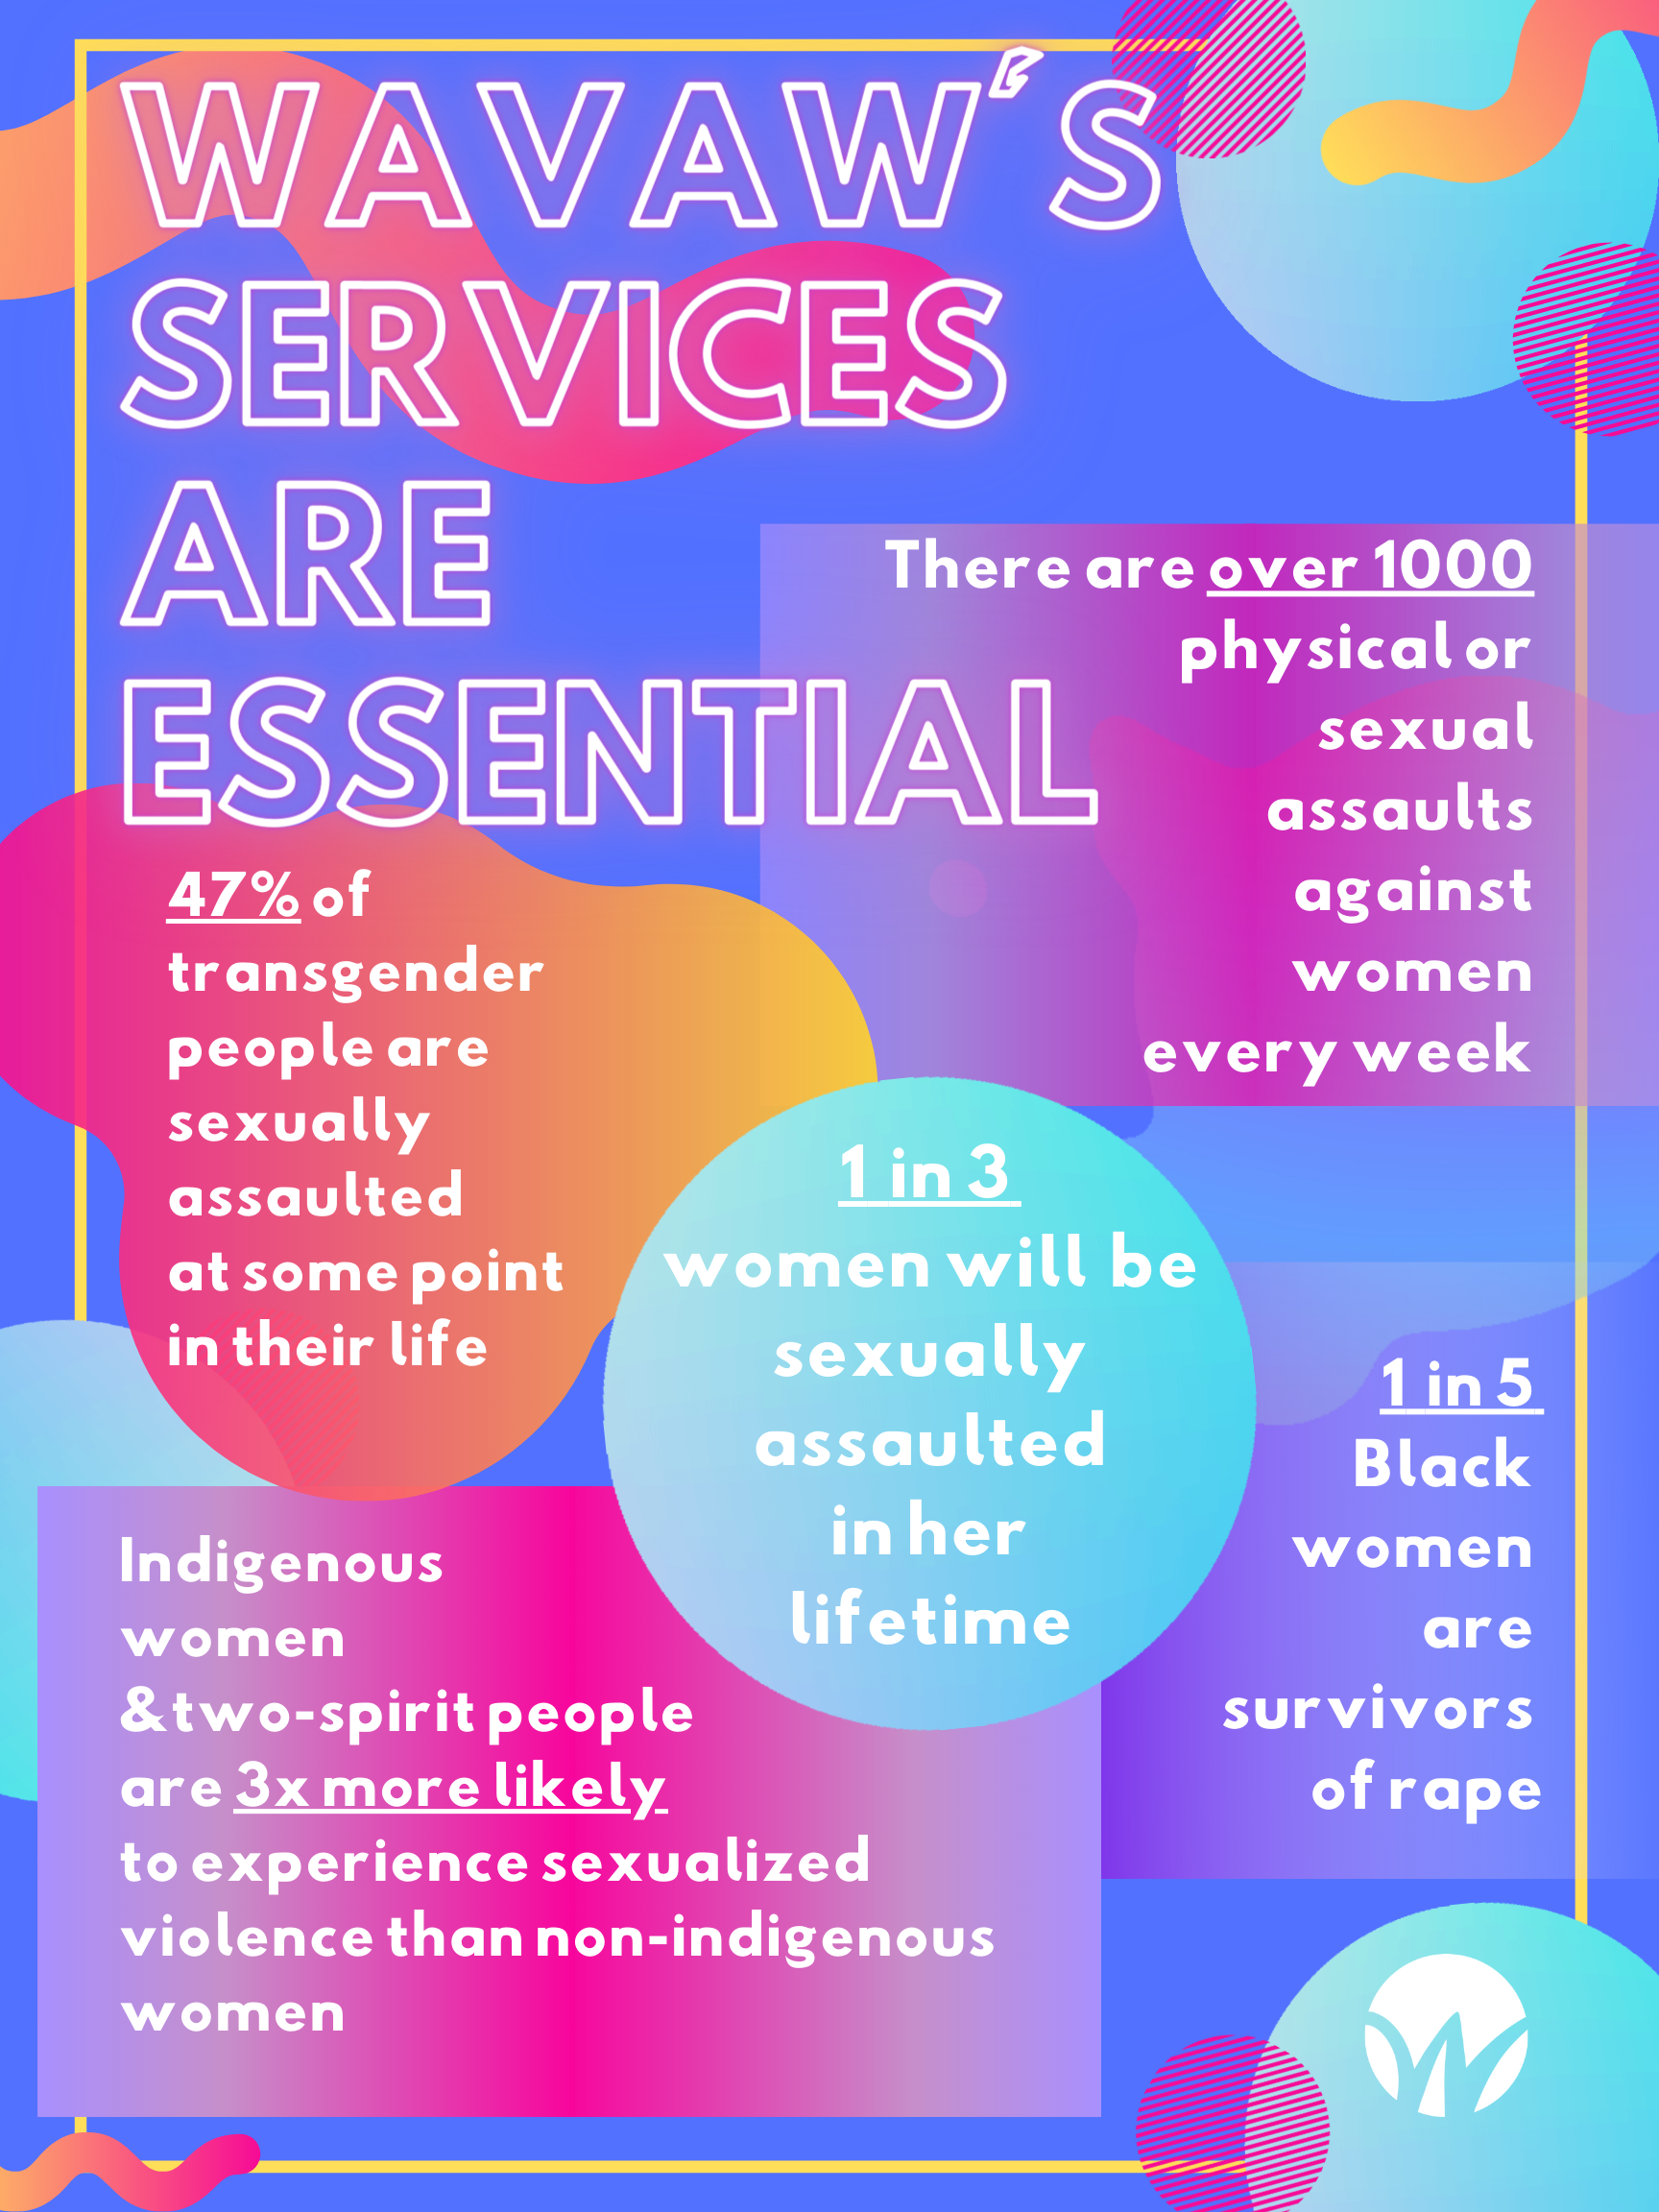 AN infographic poster reading "WAVAW'S SERVICES ARE ESSENTIAL" with stats about sexual assault.